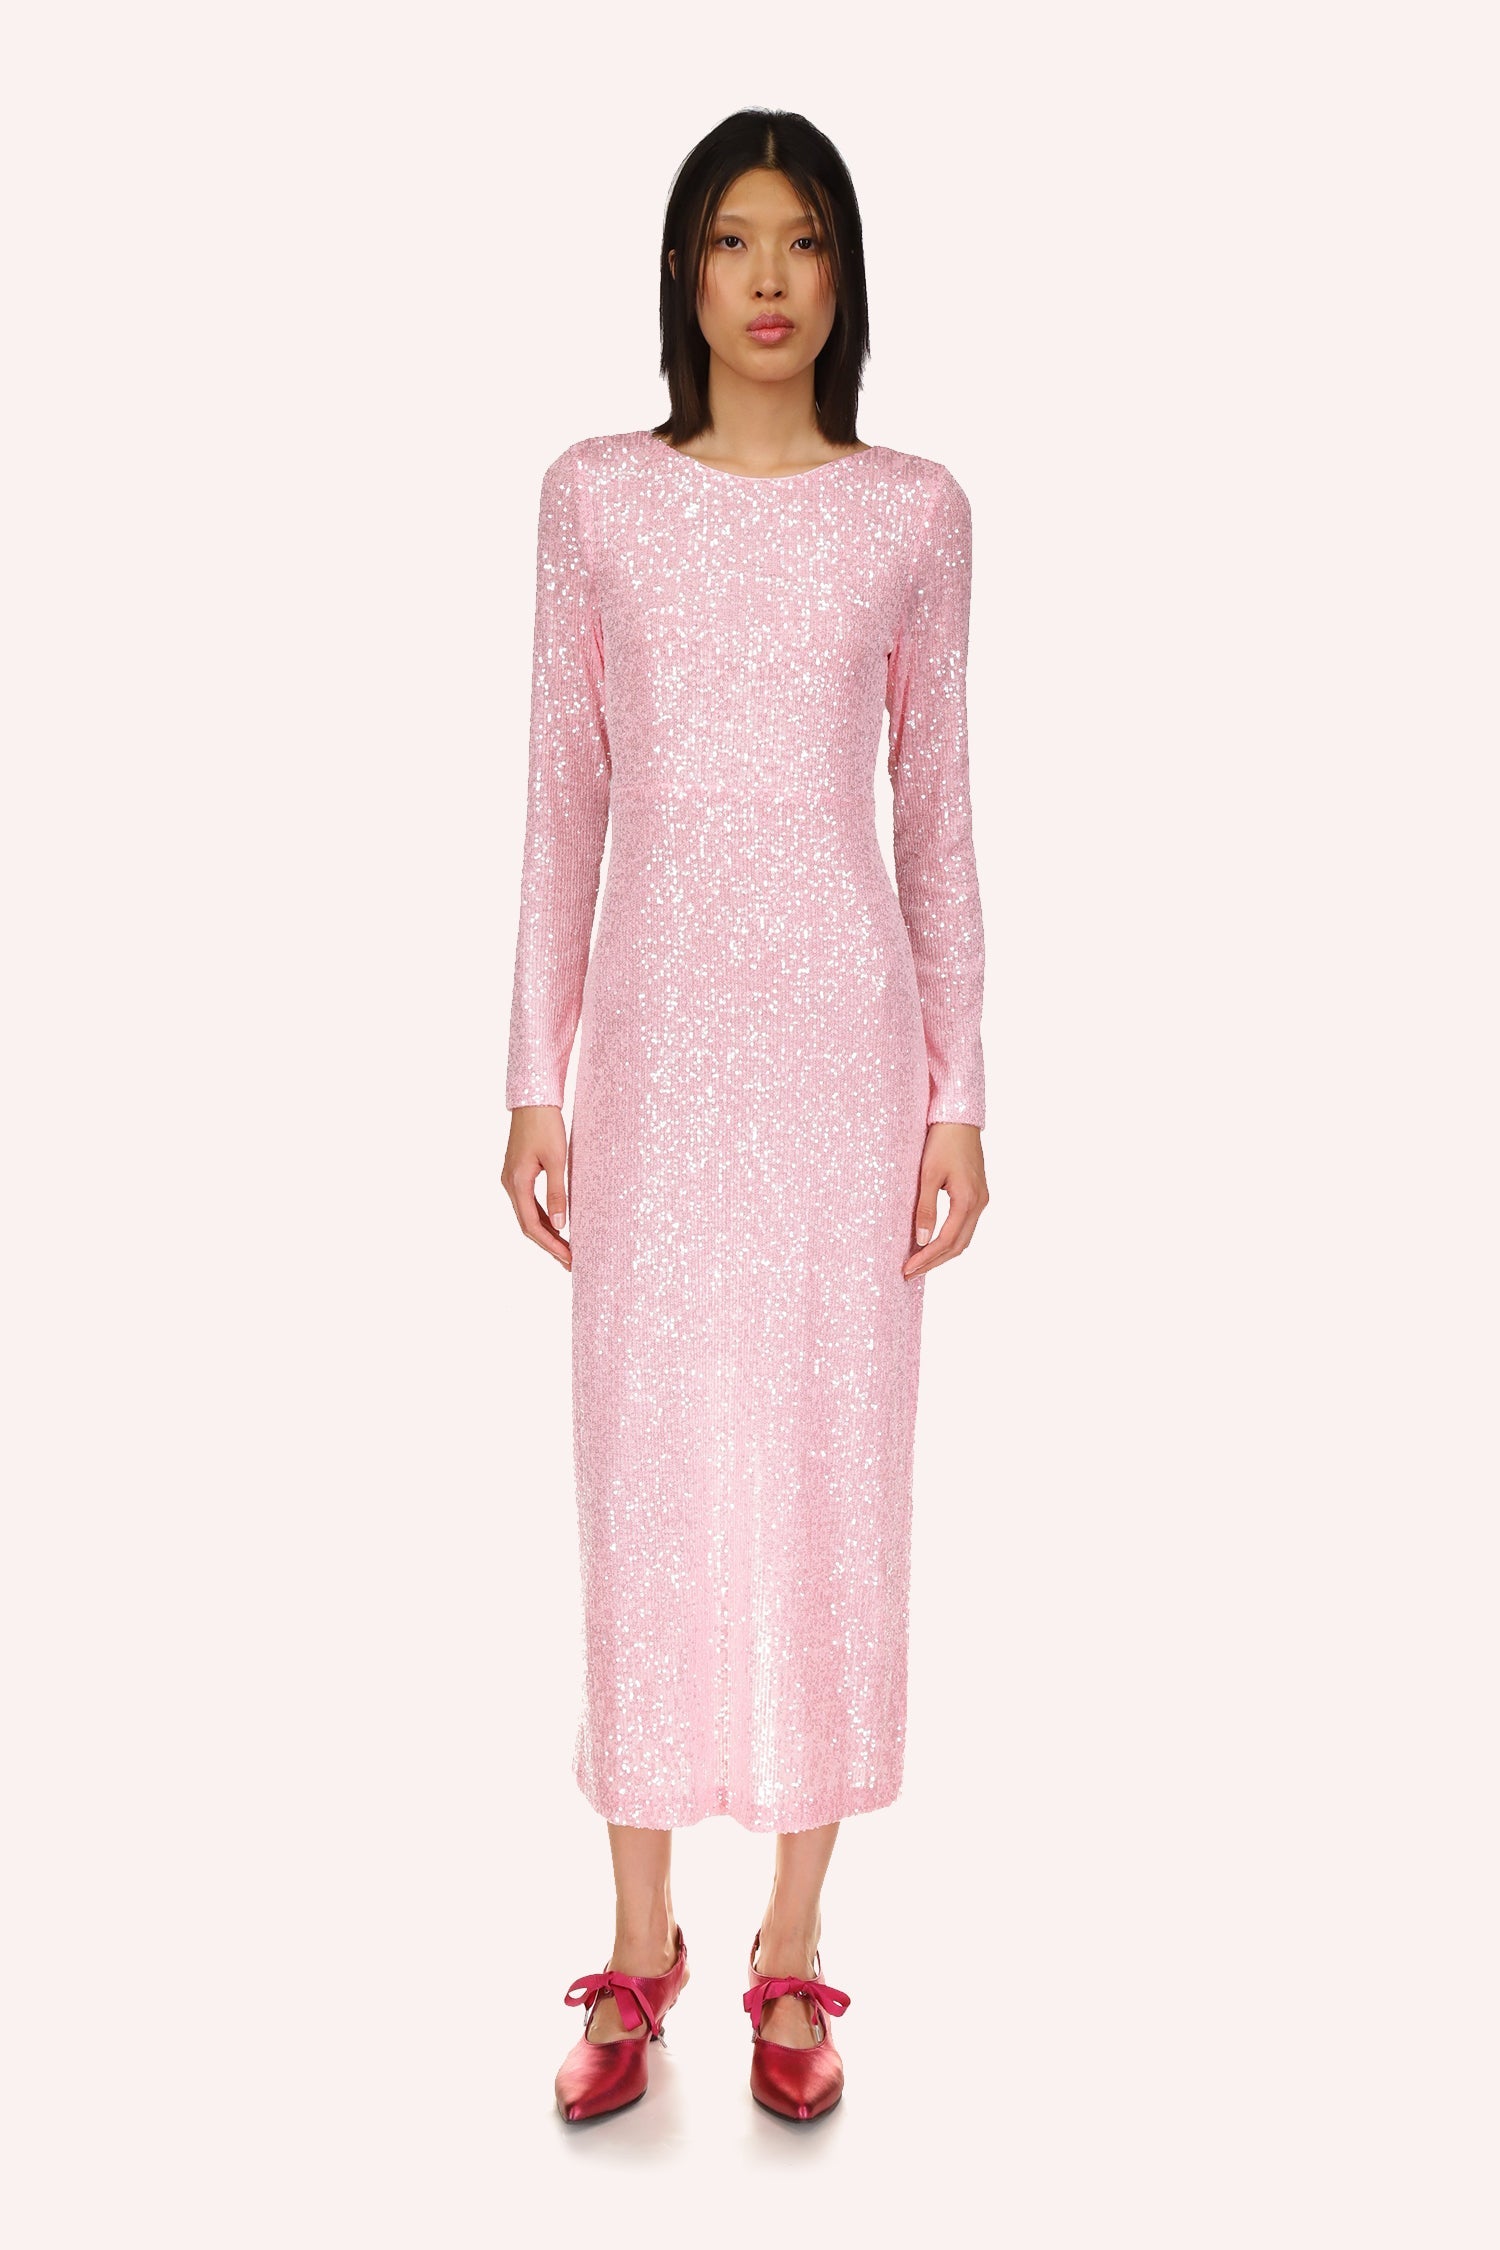 Anna Sui's Sequin Mesh Dress, soft baby pink, long sleeves and a collar frames the neckline